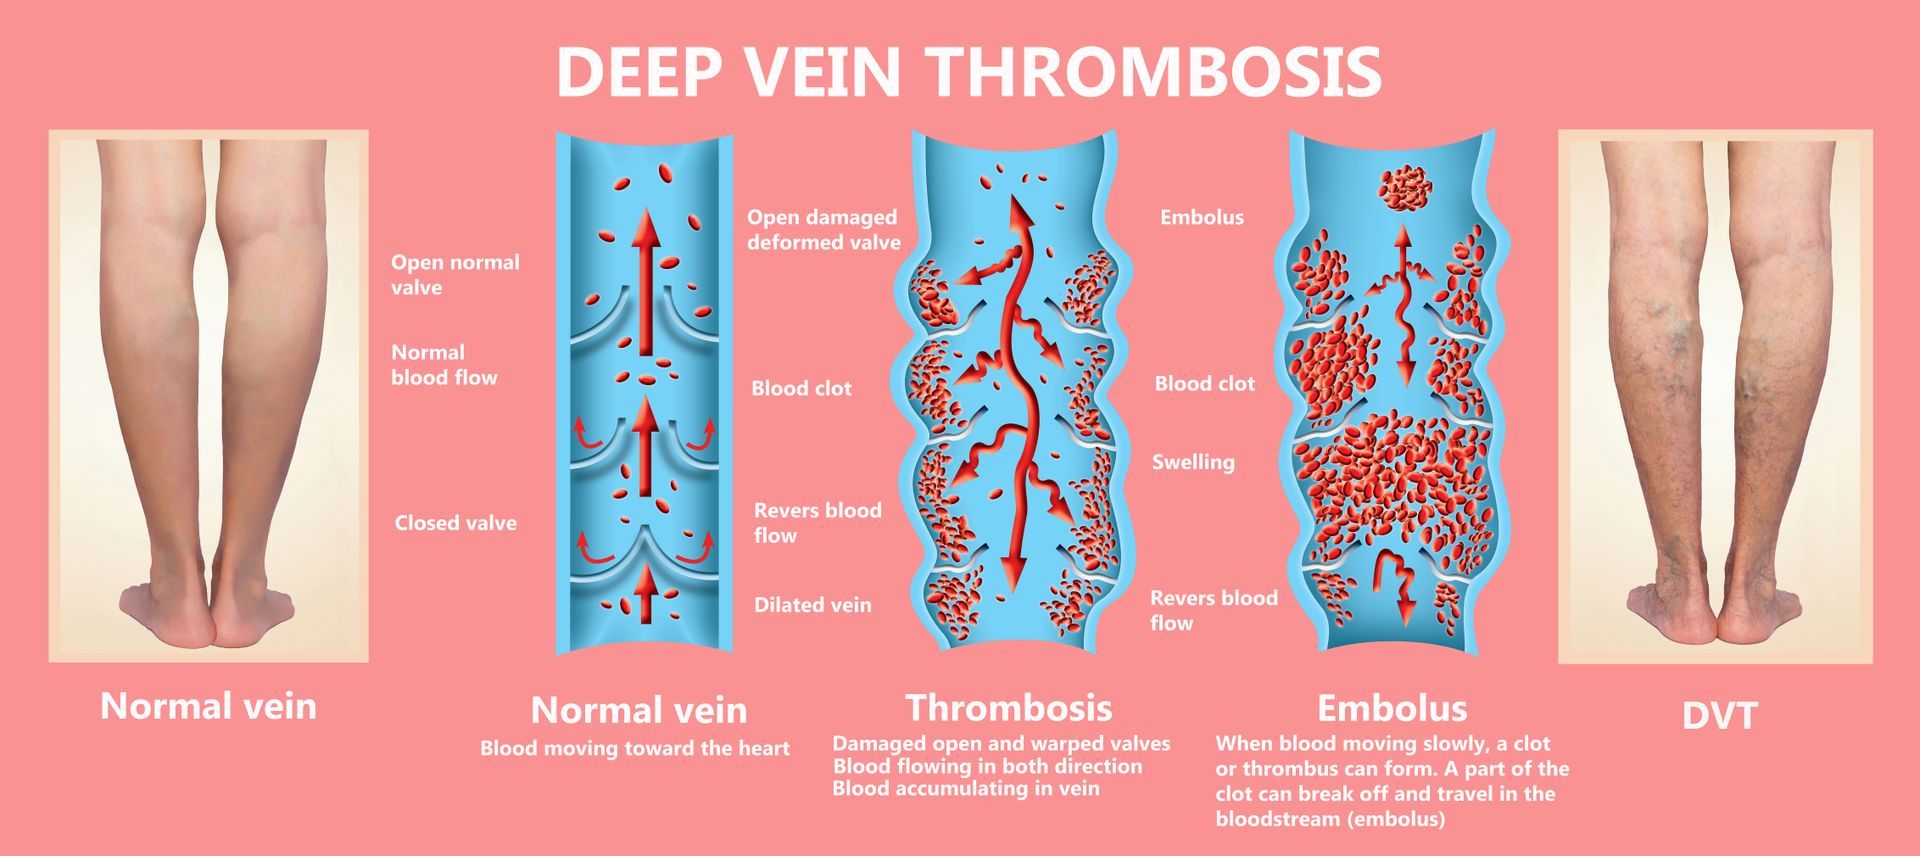 Venous Thrombosis Causes Symptoms Prevention And Treatments